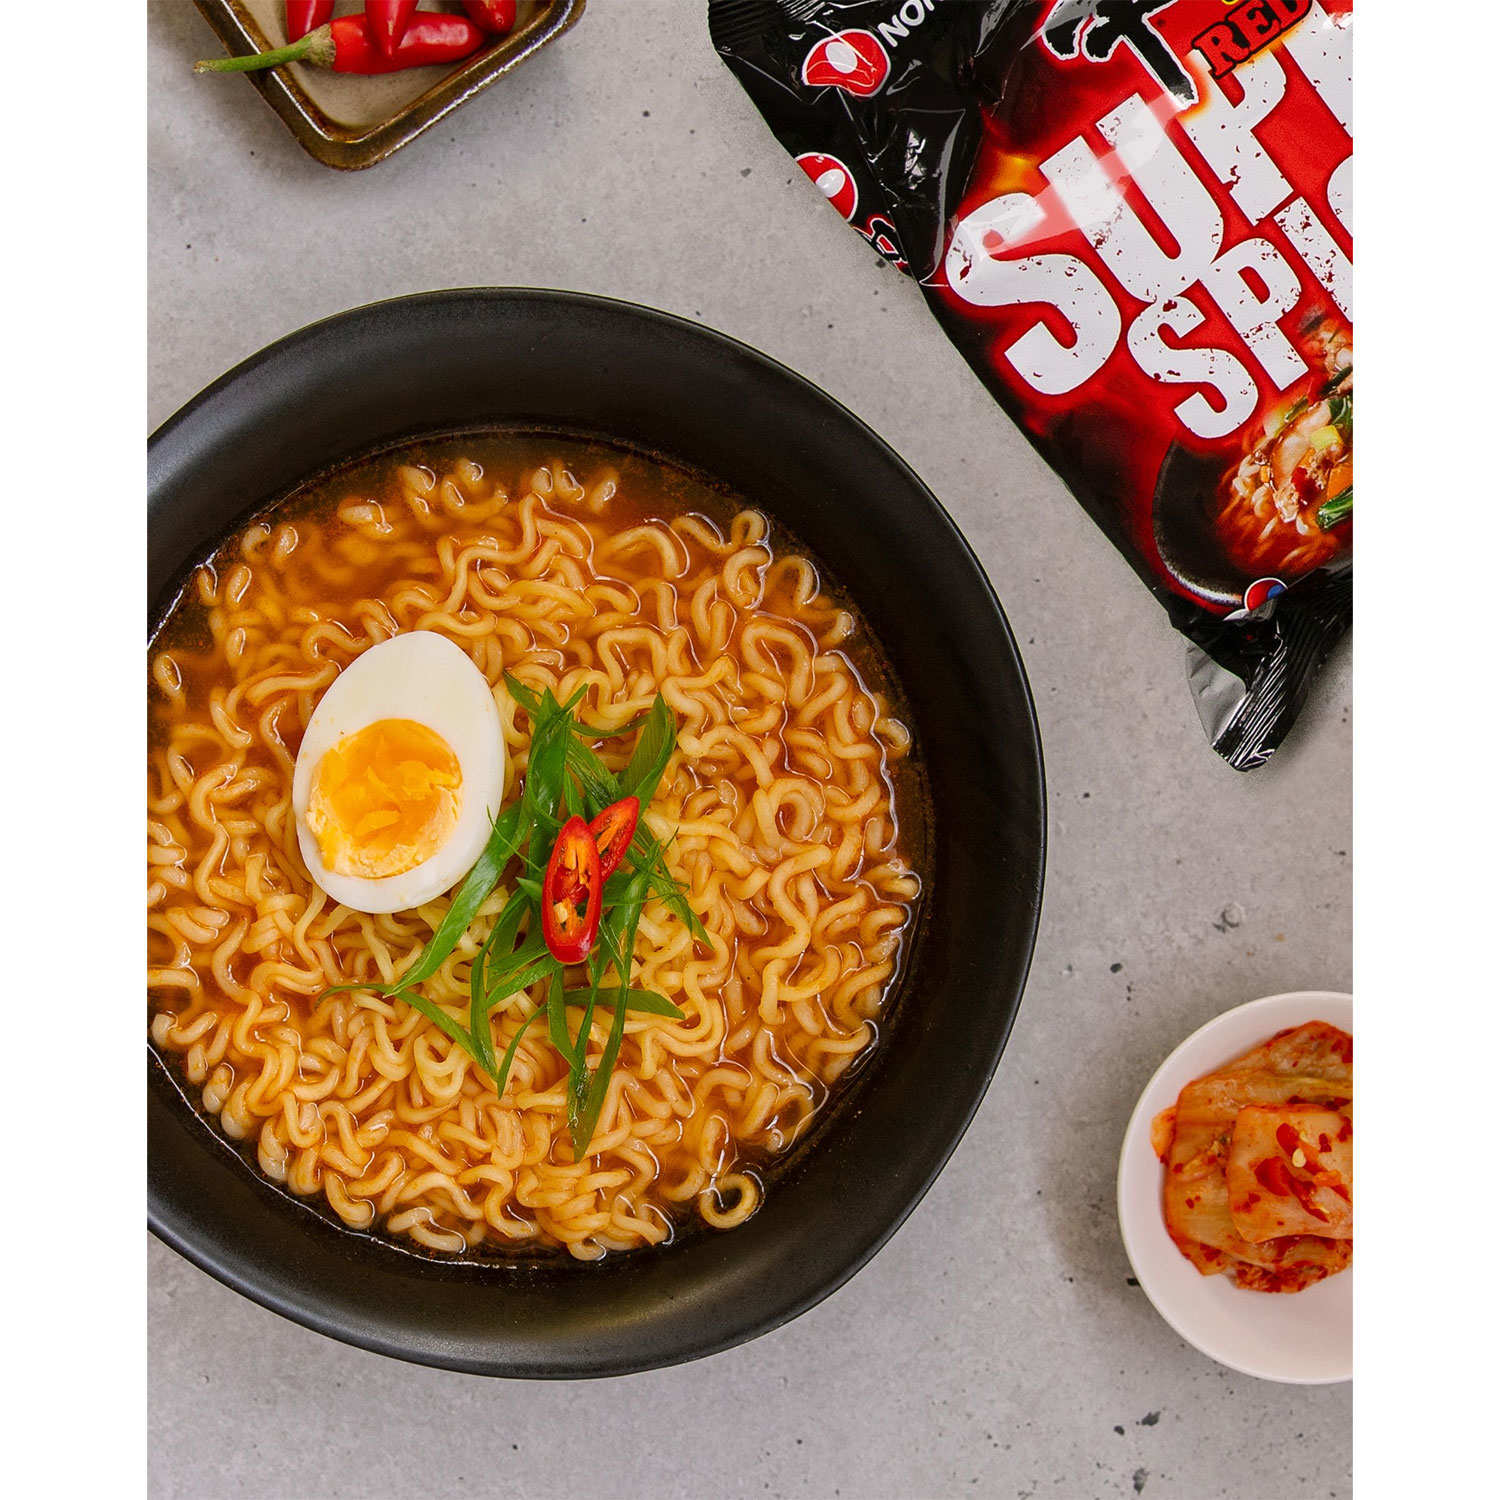 Instant Noodles Shin Red Super Spicy Nongshim